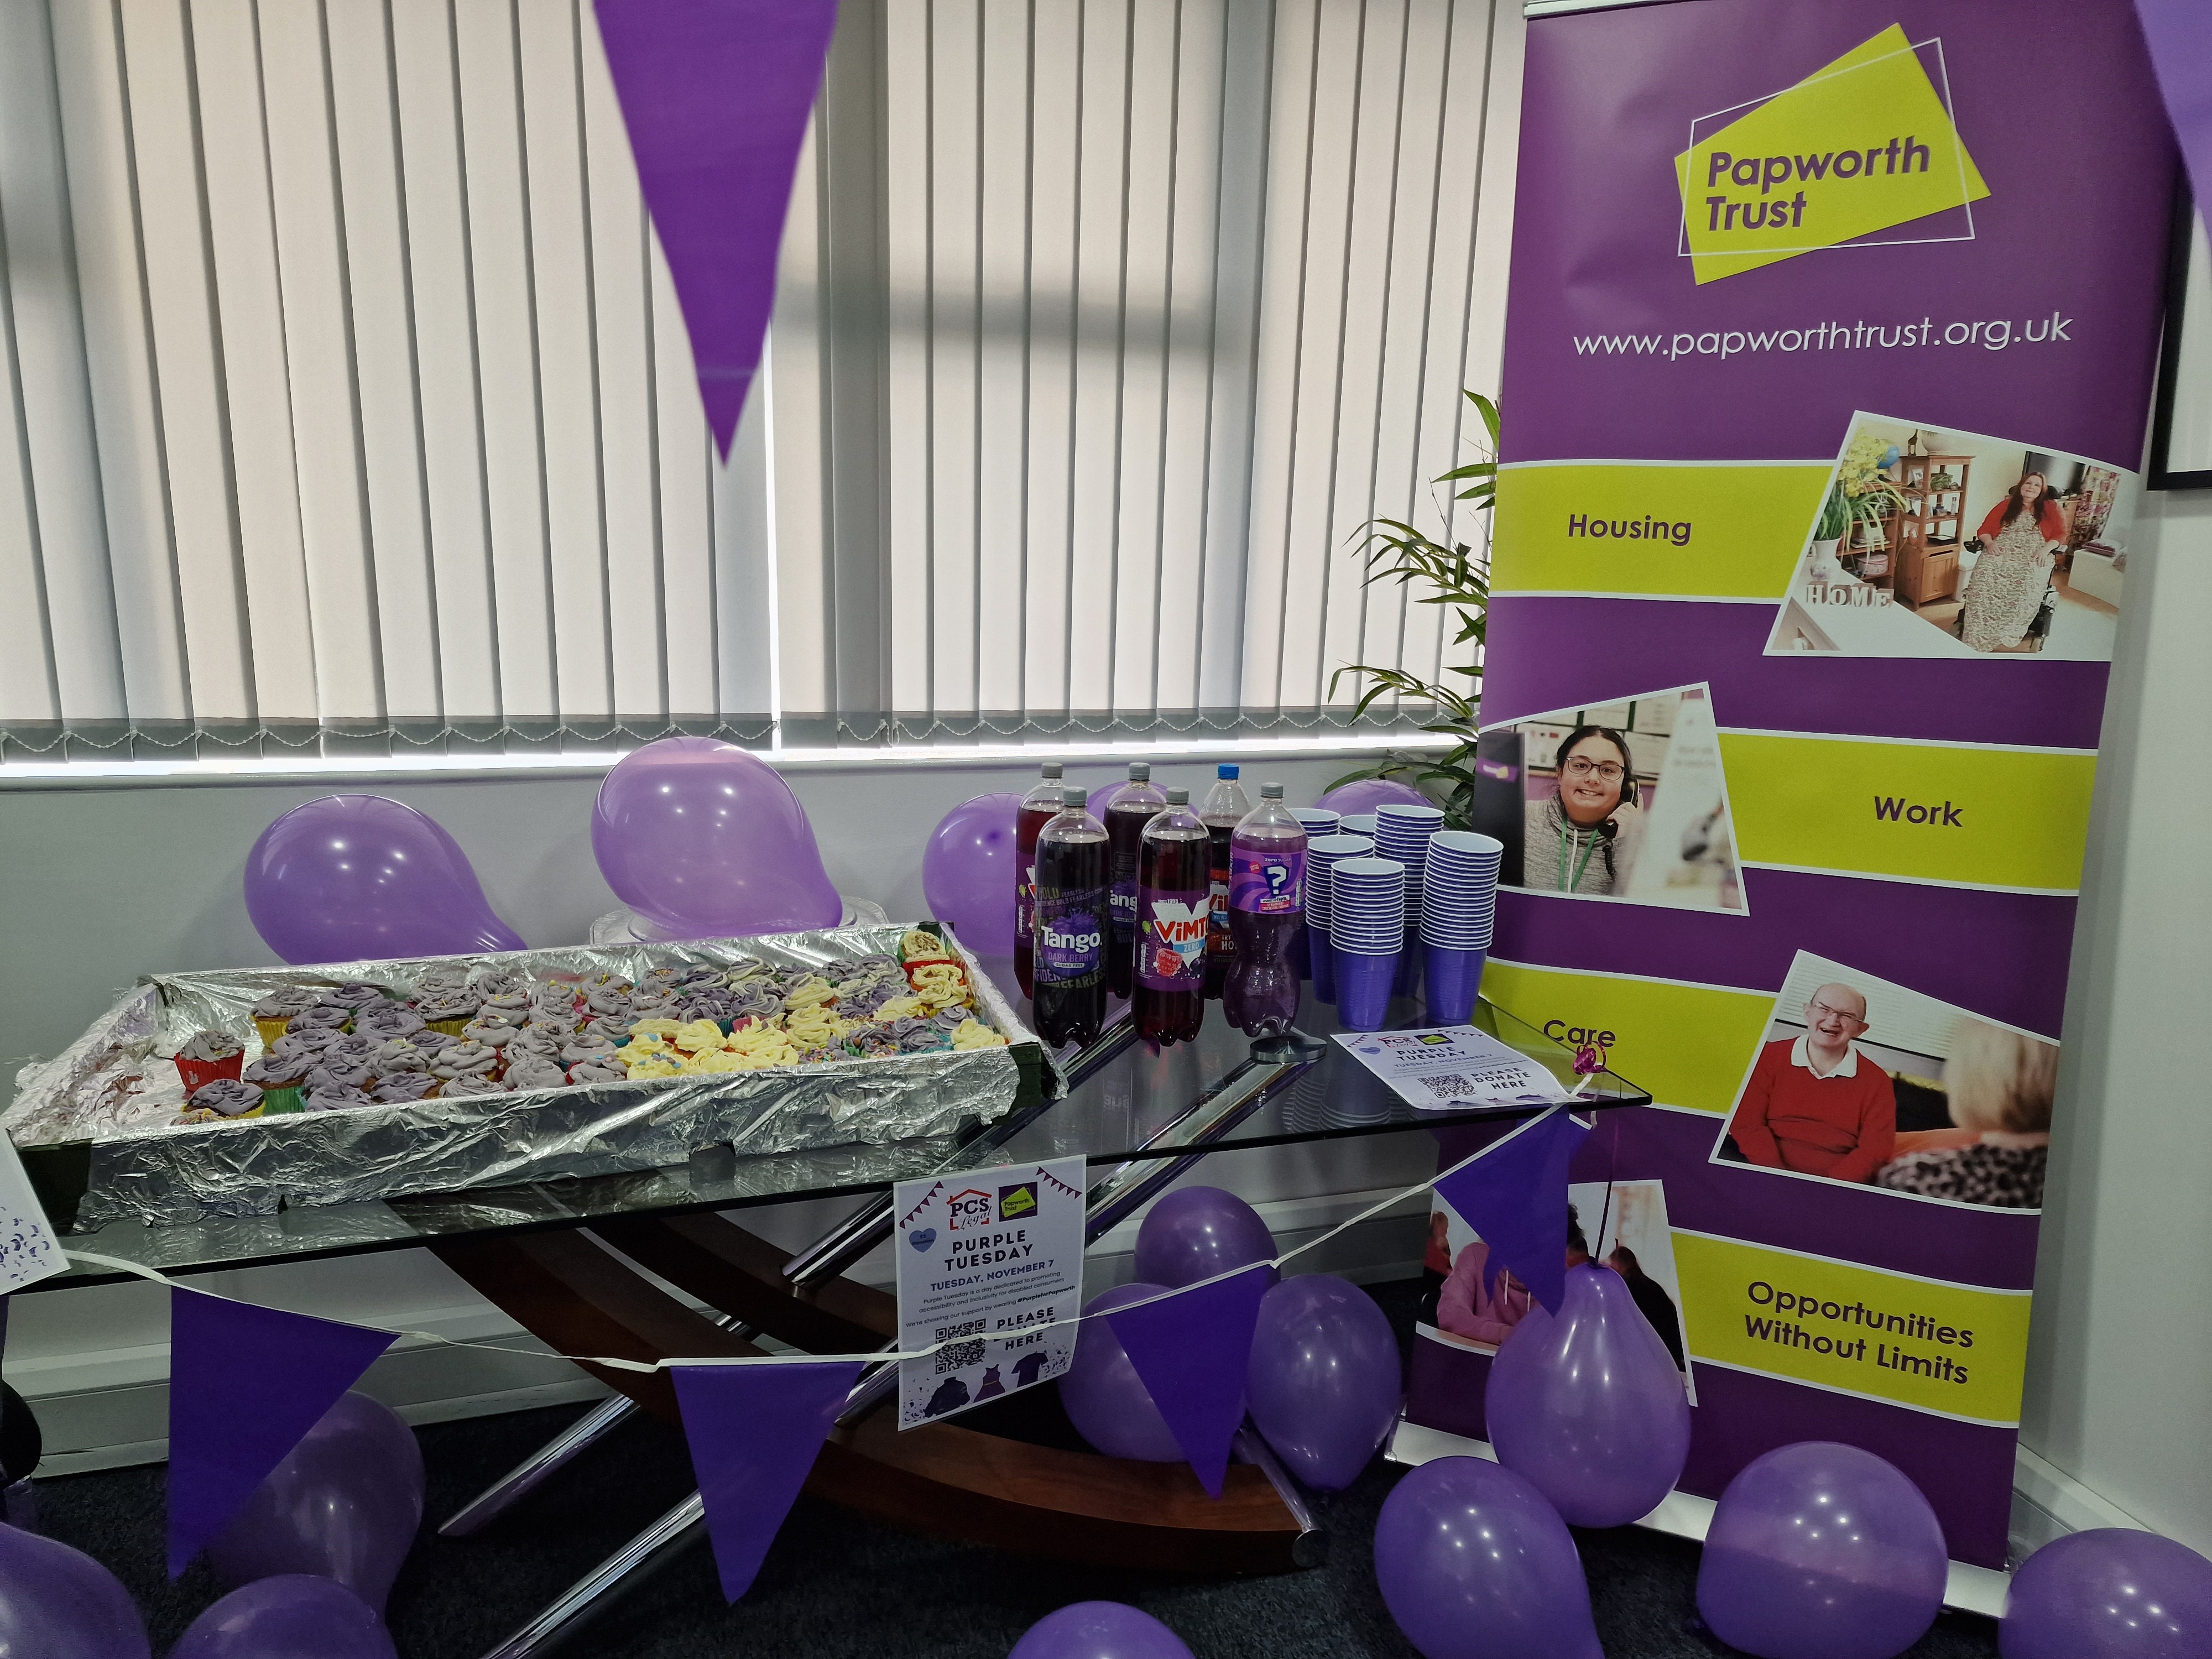 Desk with cupcakes and Papworth Trust banner